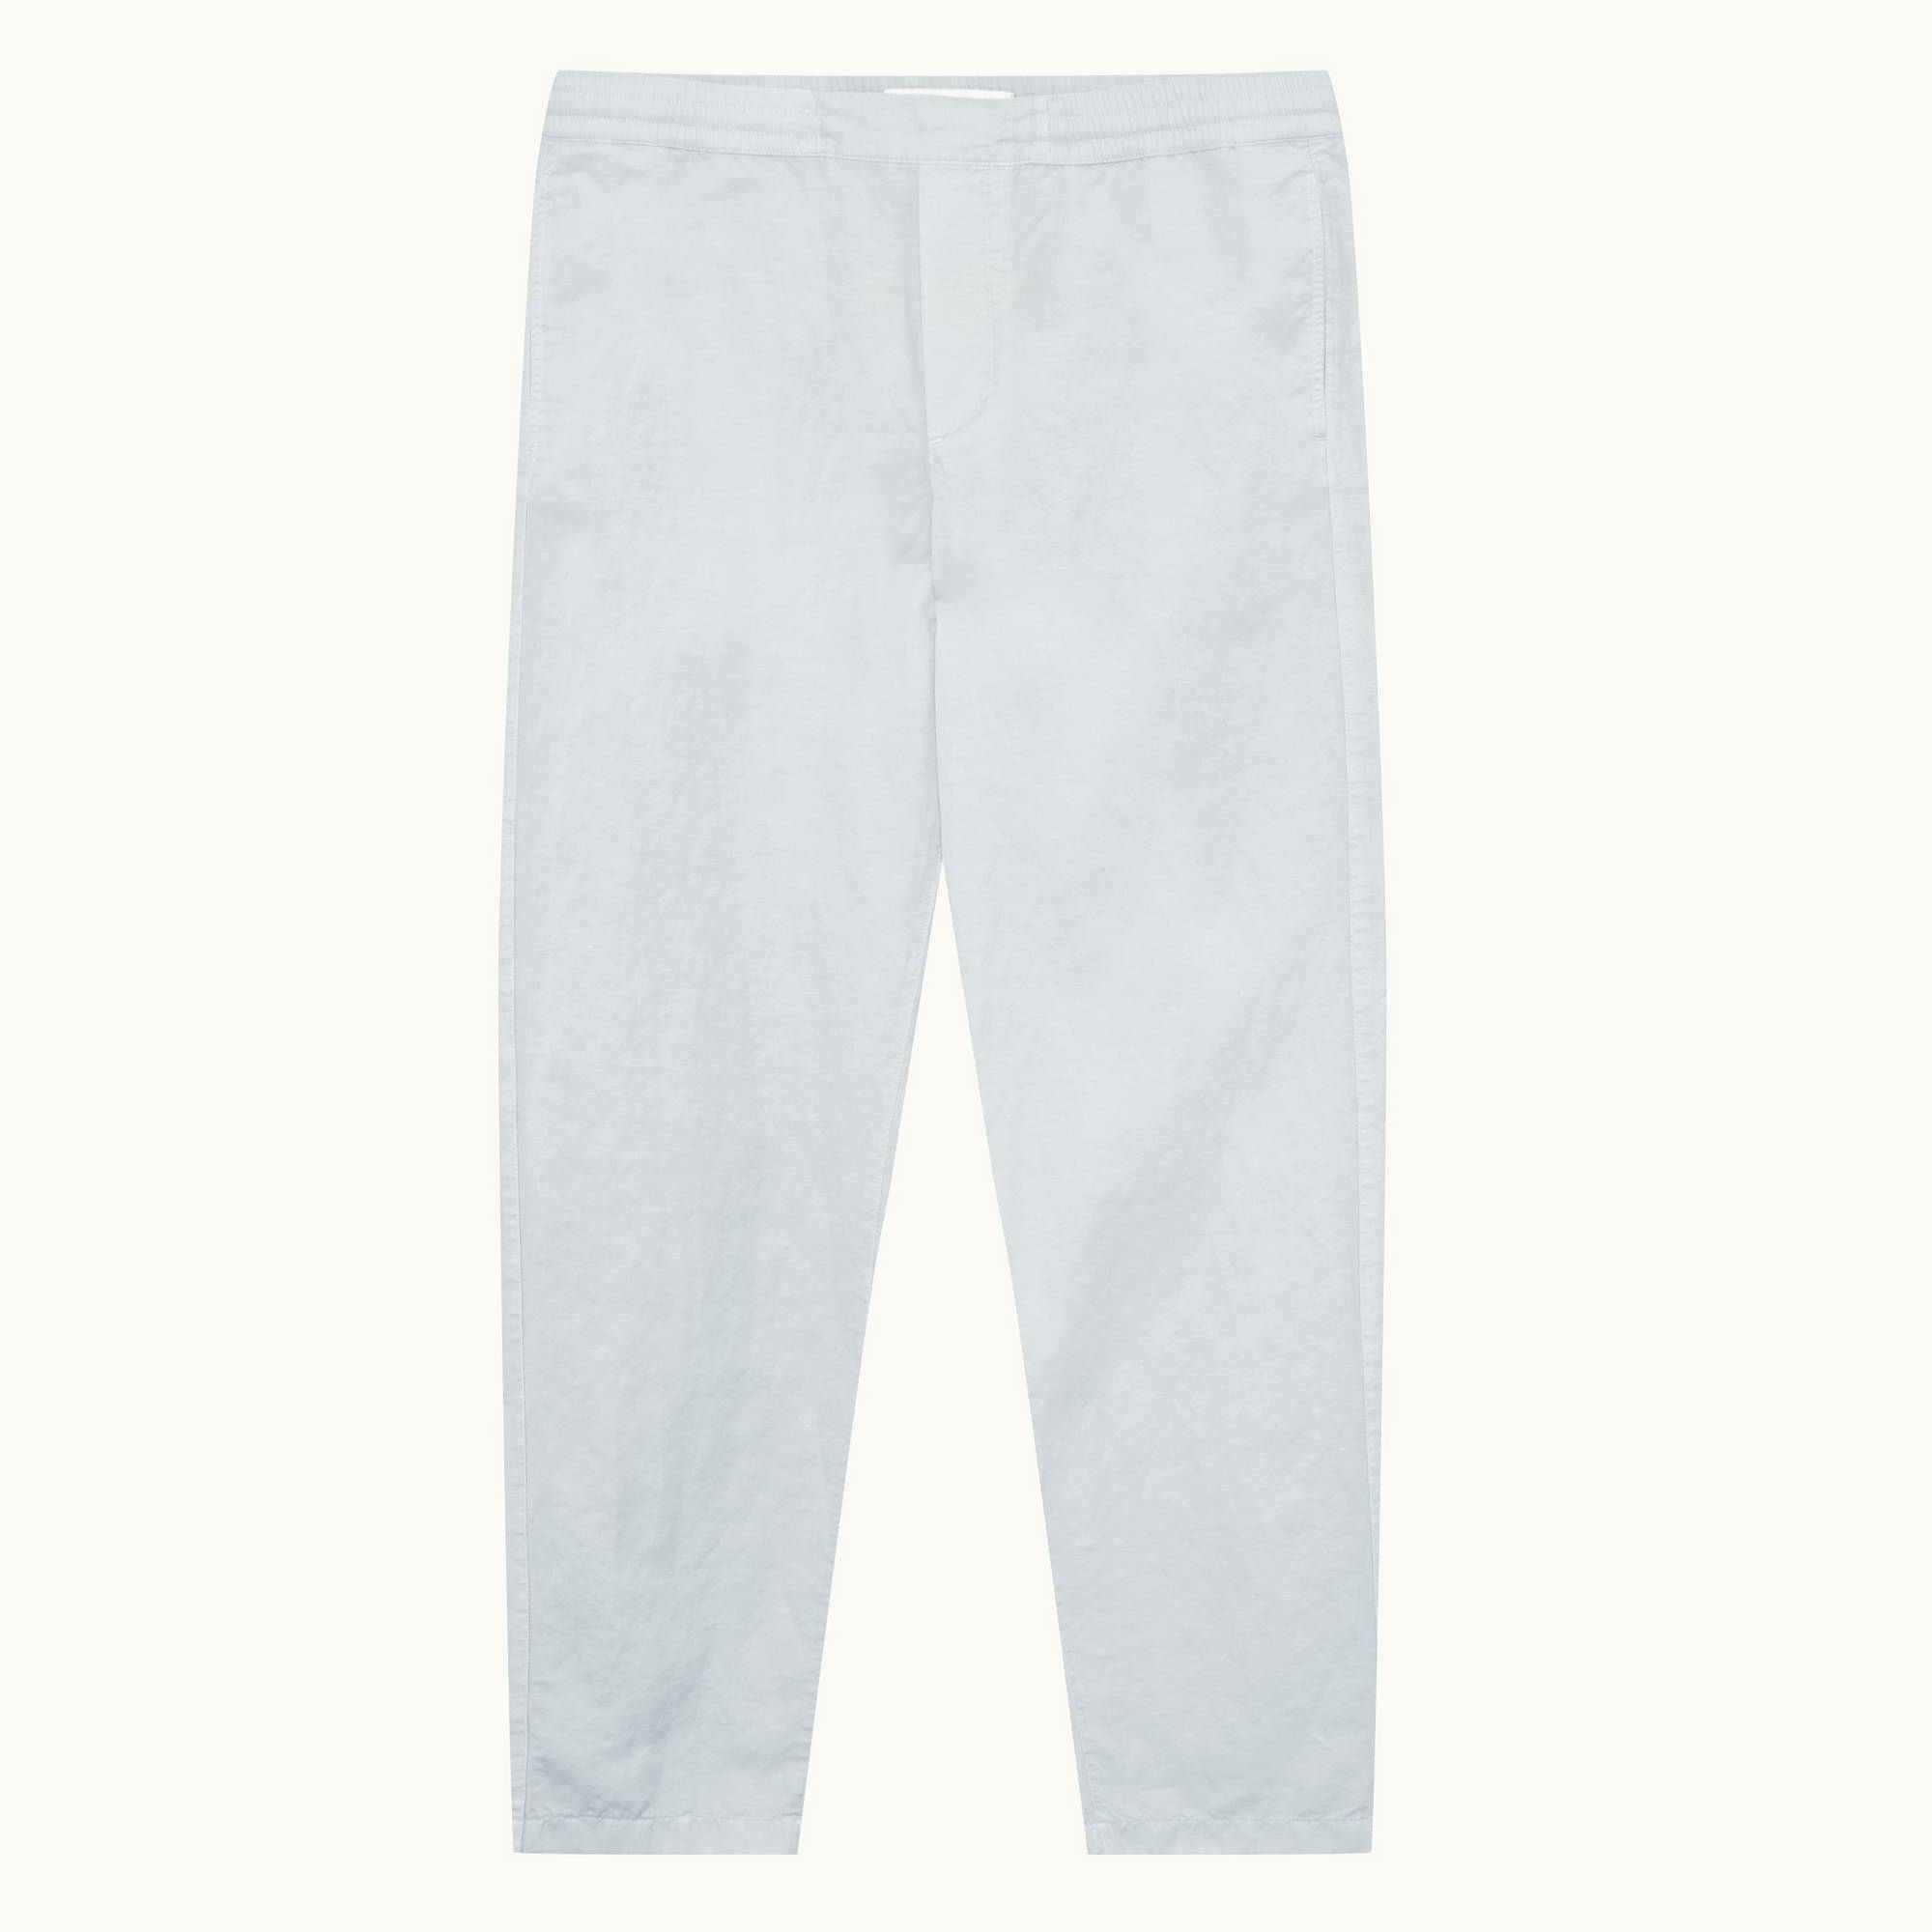 Sonoran Linen - Mens Serenity Blue Relaxed Fit Cotton-Linen Trousers